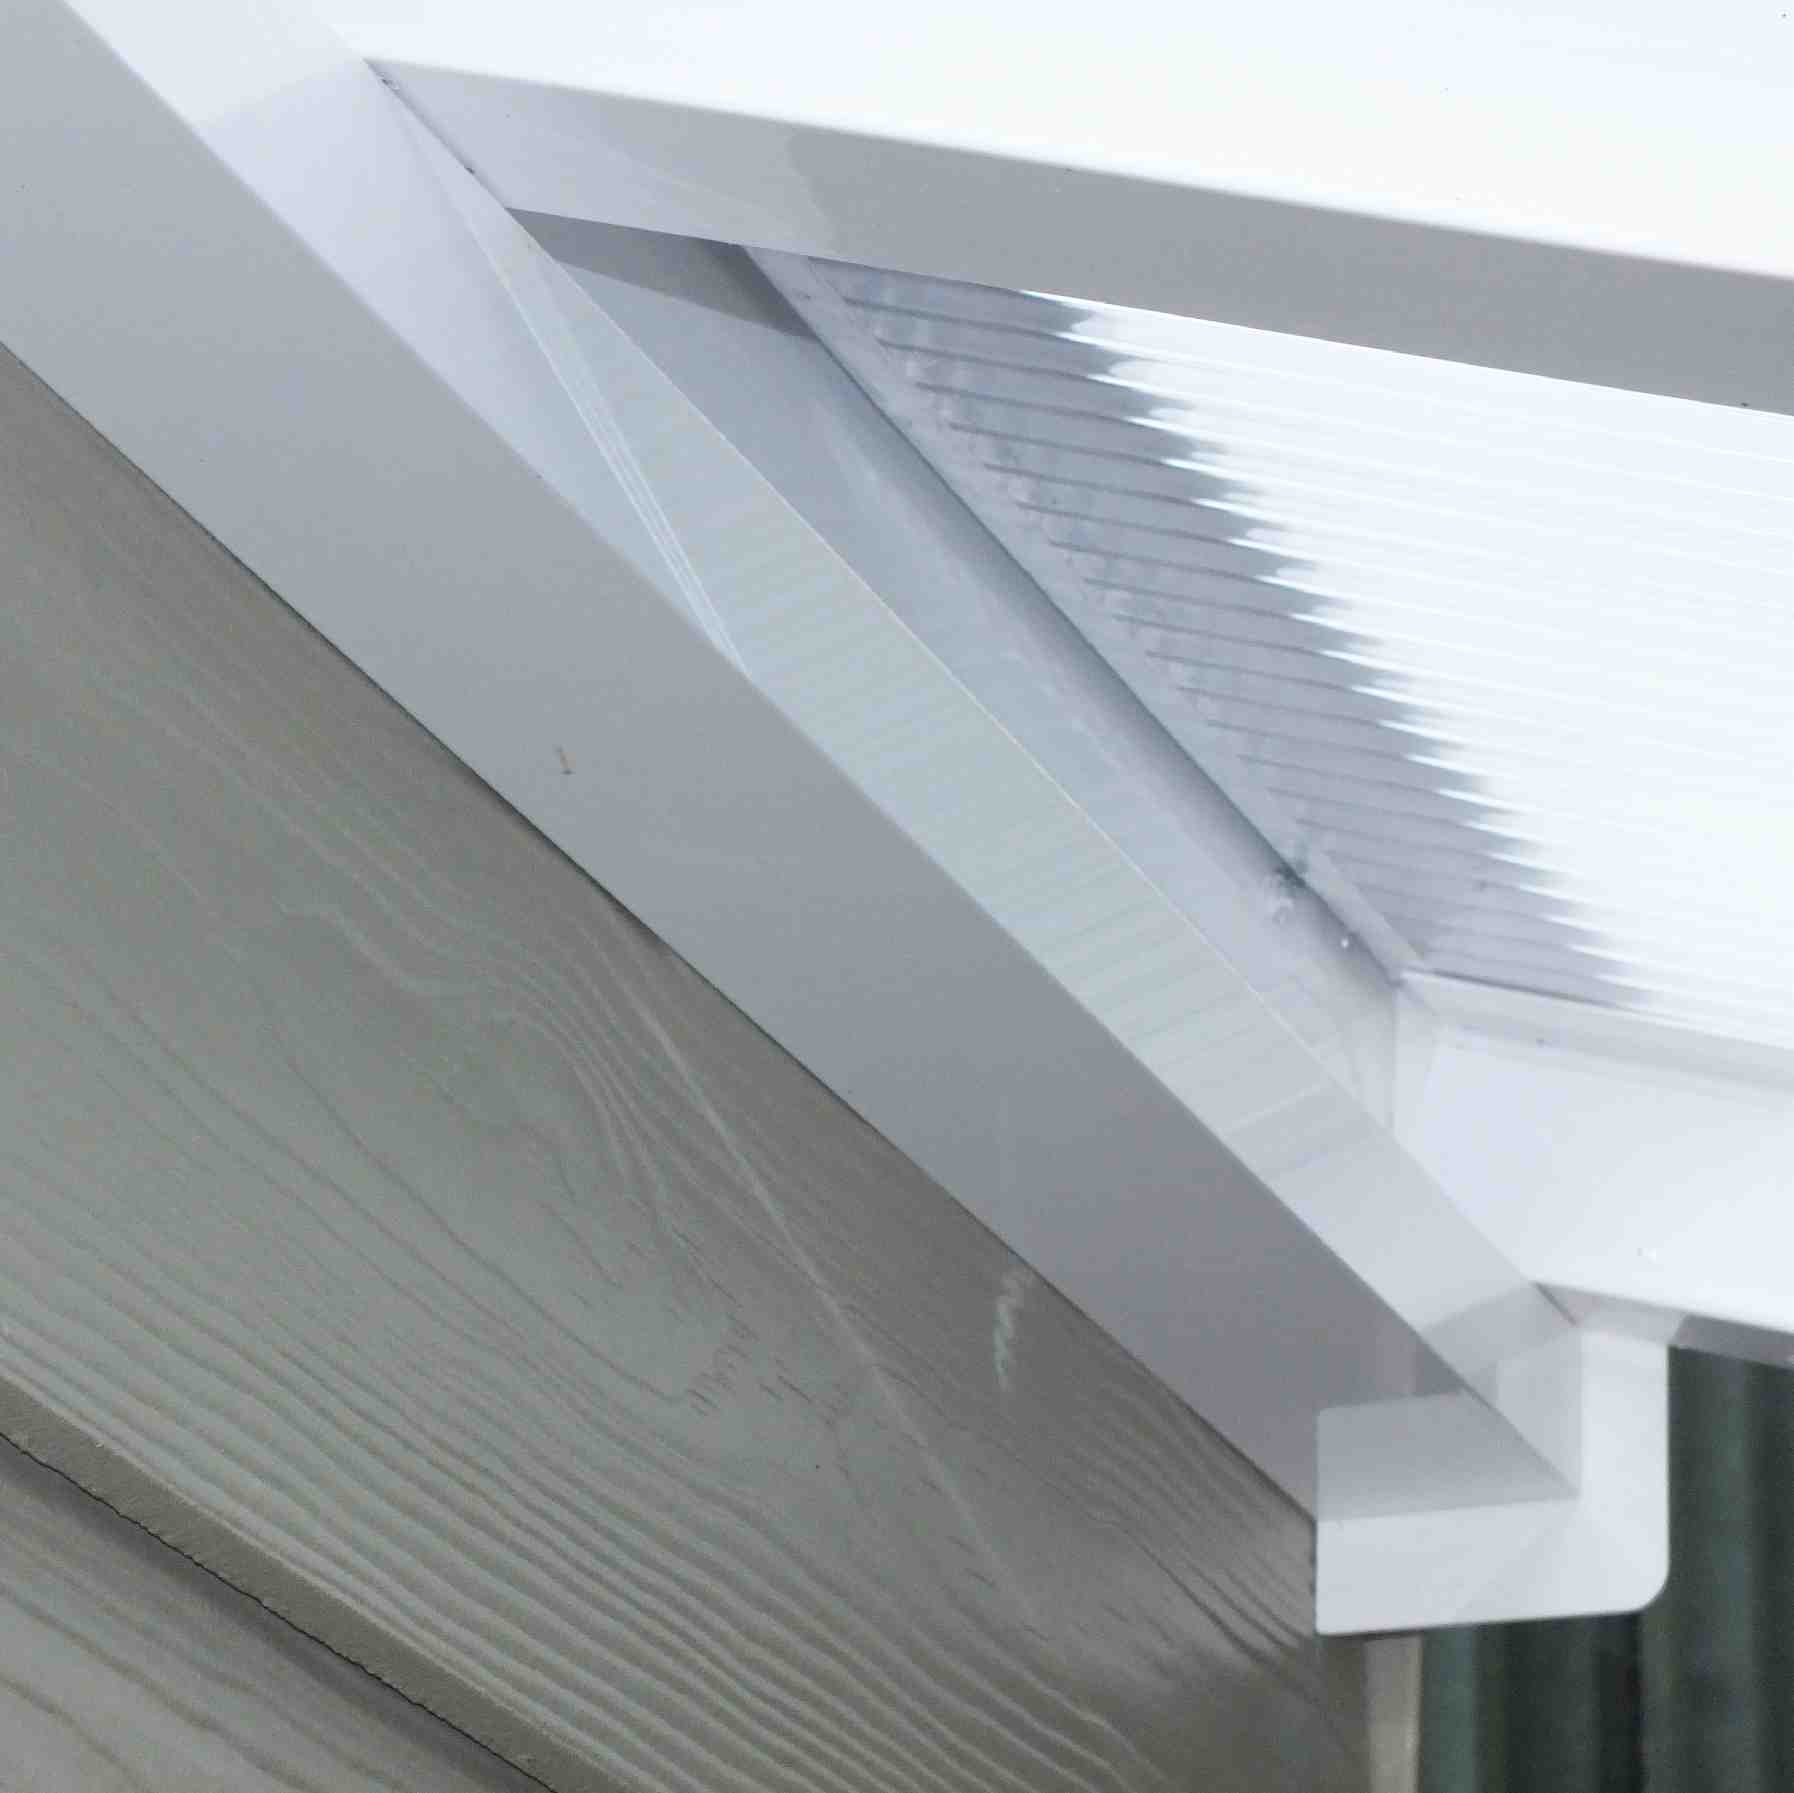 Great deals on Omega Verandah White with 6mm Glass Clear Plate Polycarbonate Glazing - 7.0m (W) x 3.5m (P), (4) Supporting Posts